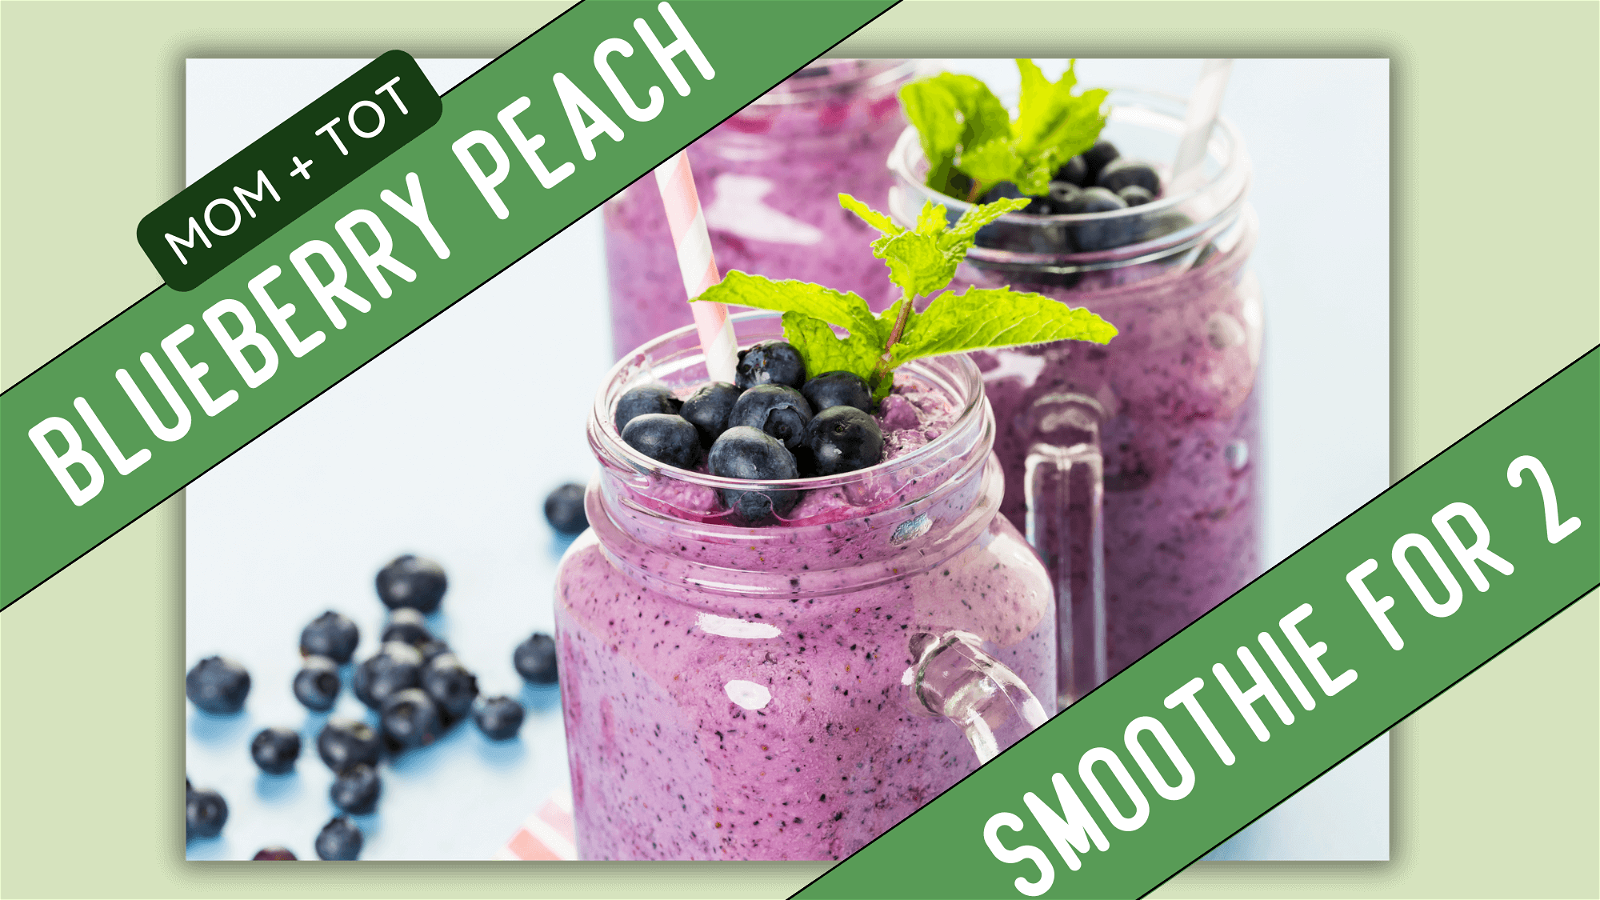 Image of Blueberry Peach Mom and Tot Smoothie